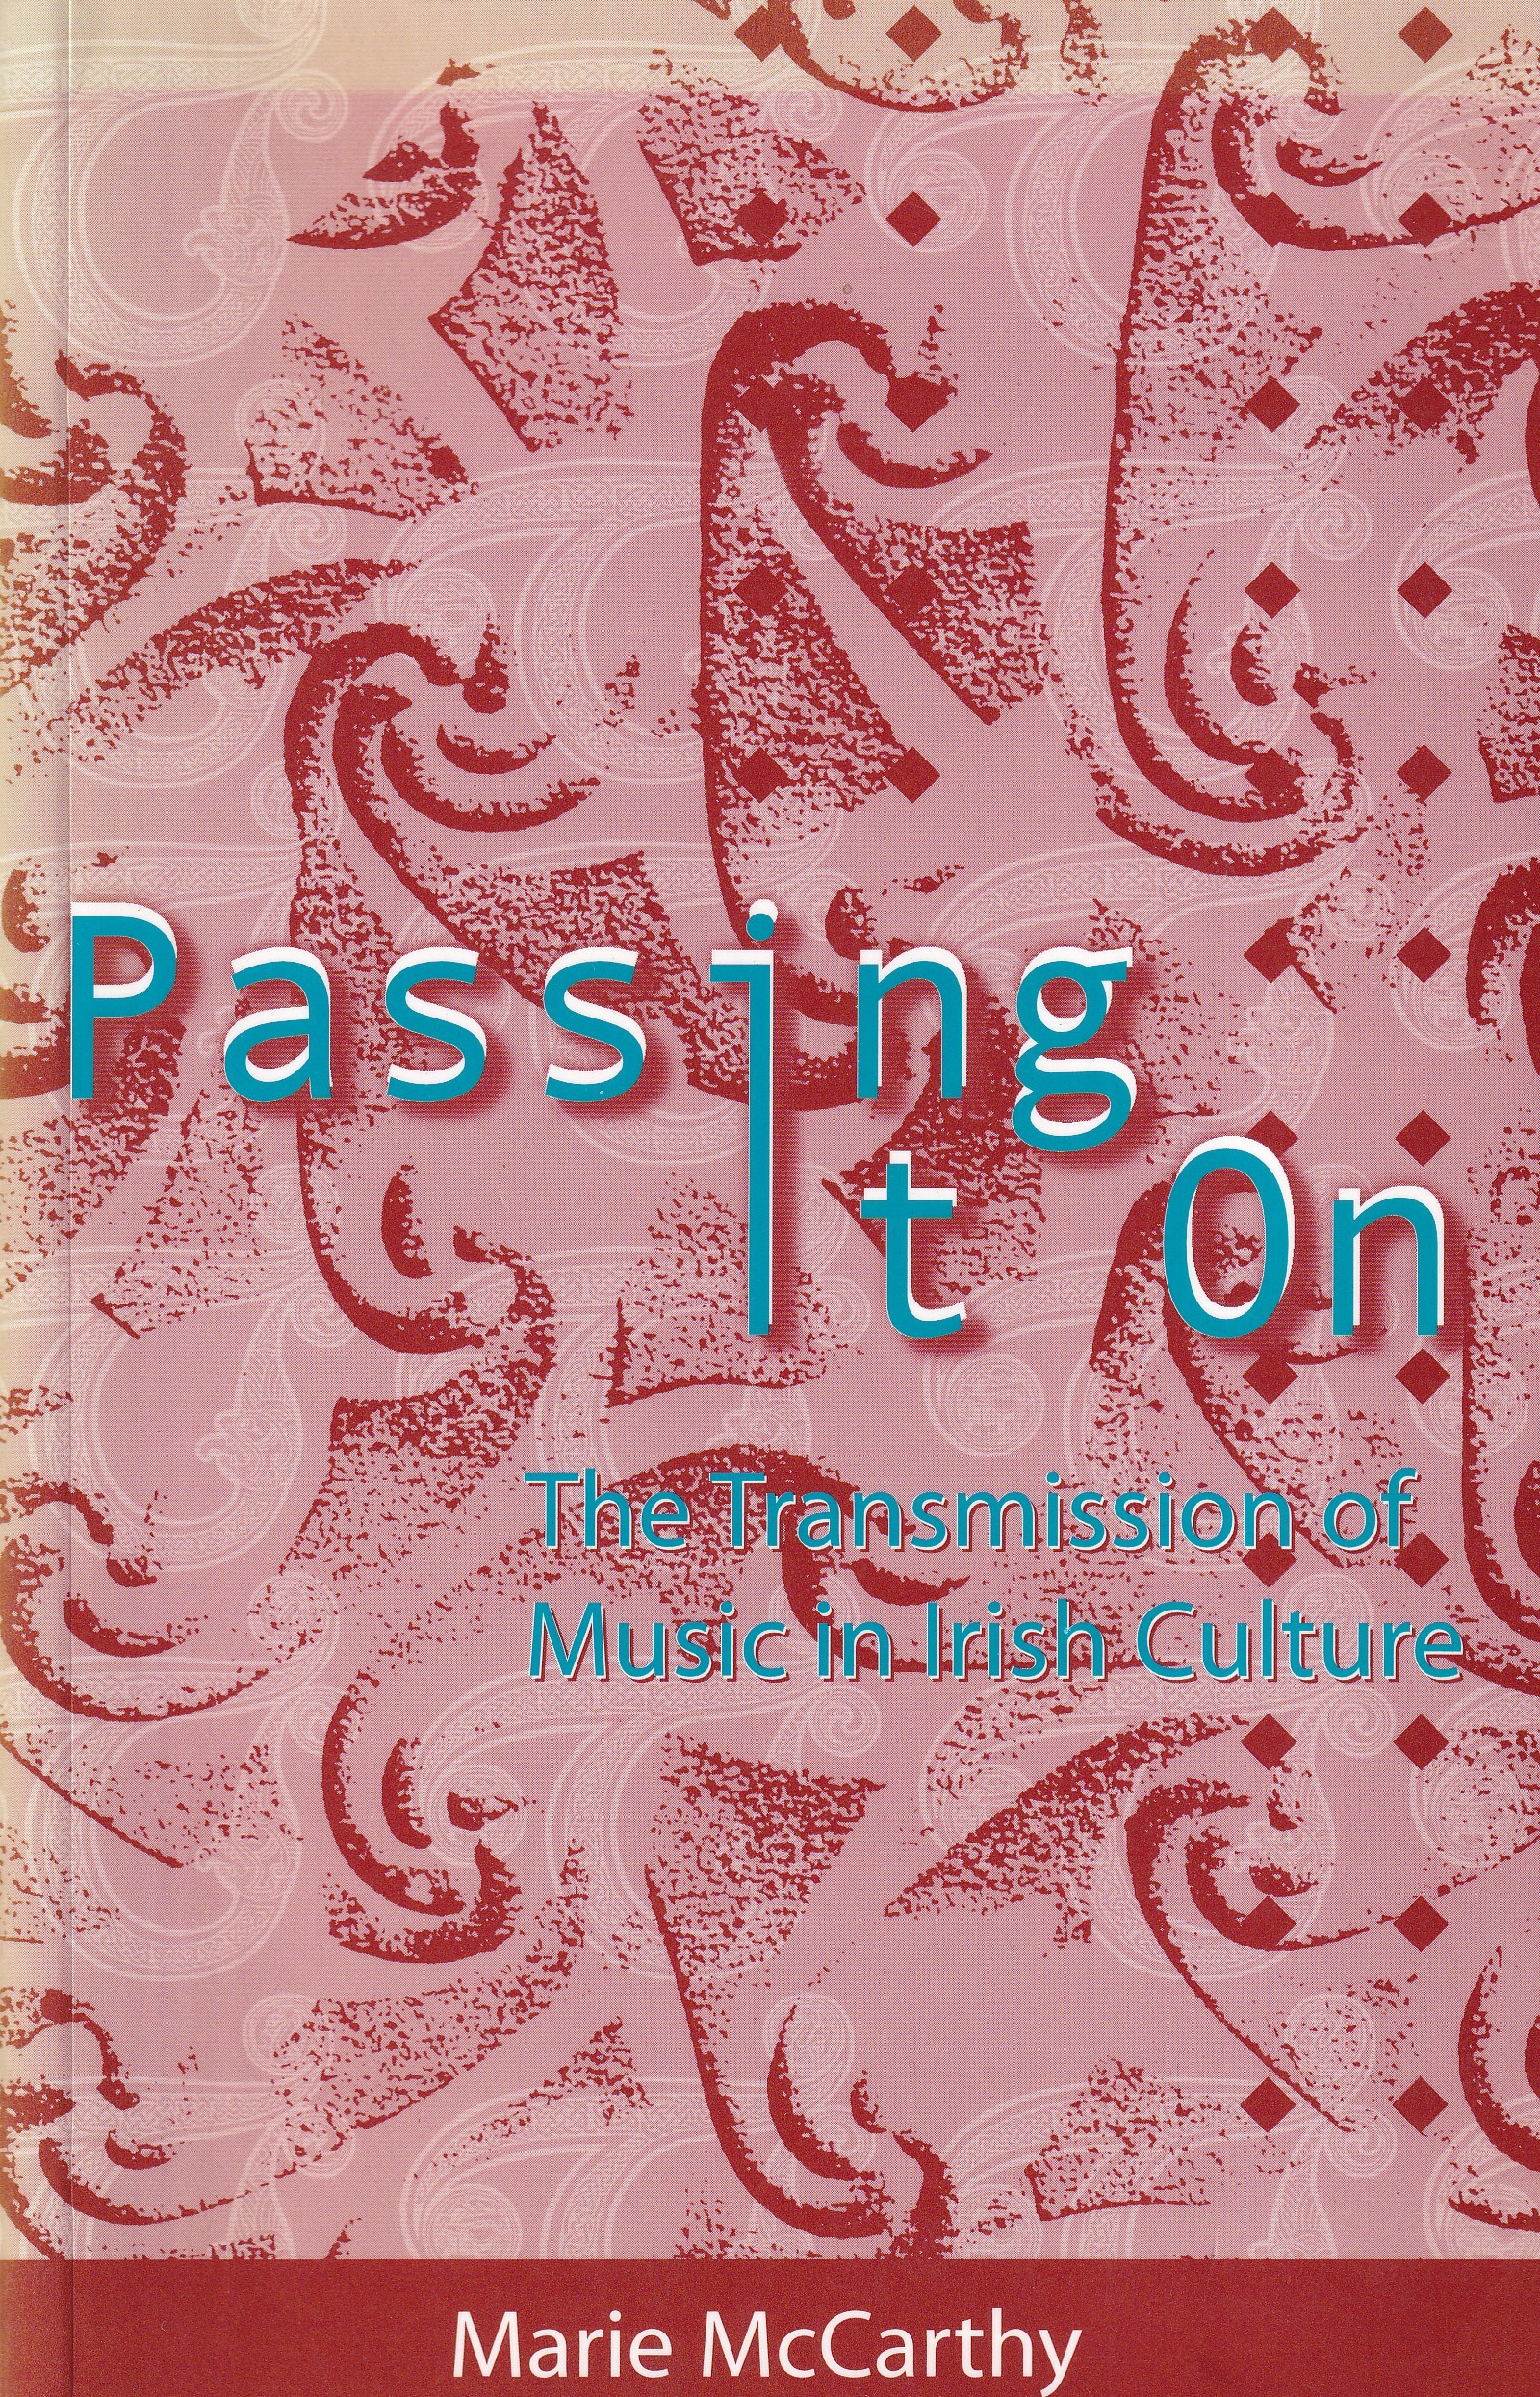 Passing it On: The Transmission of Music in Irish Culture | Marie McCarthy | Charlie Byrne's